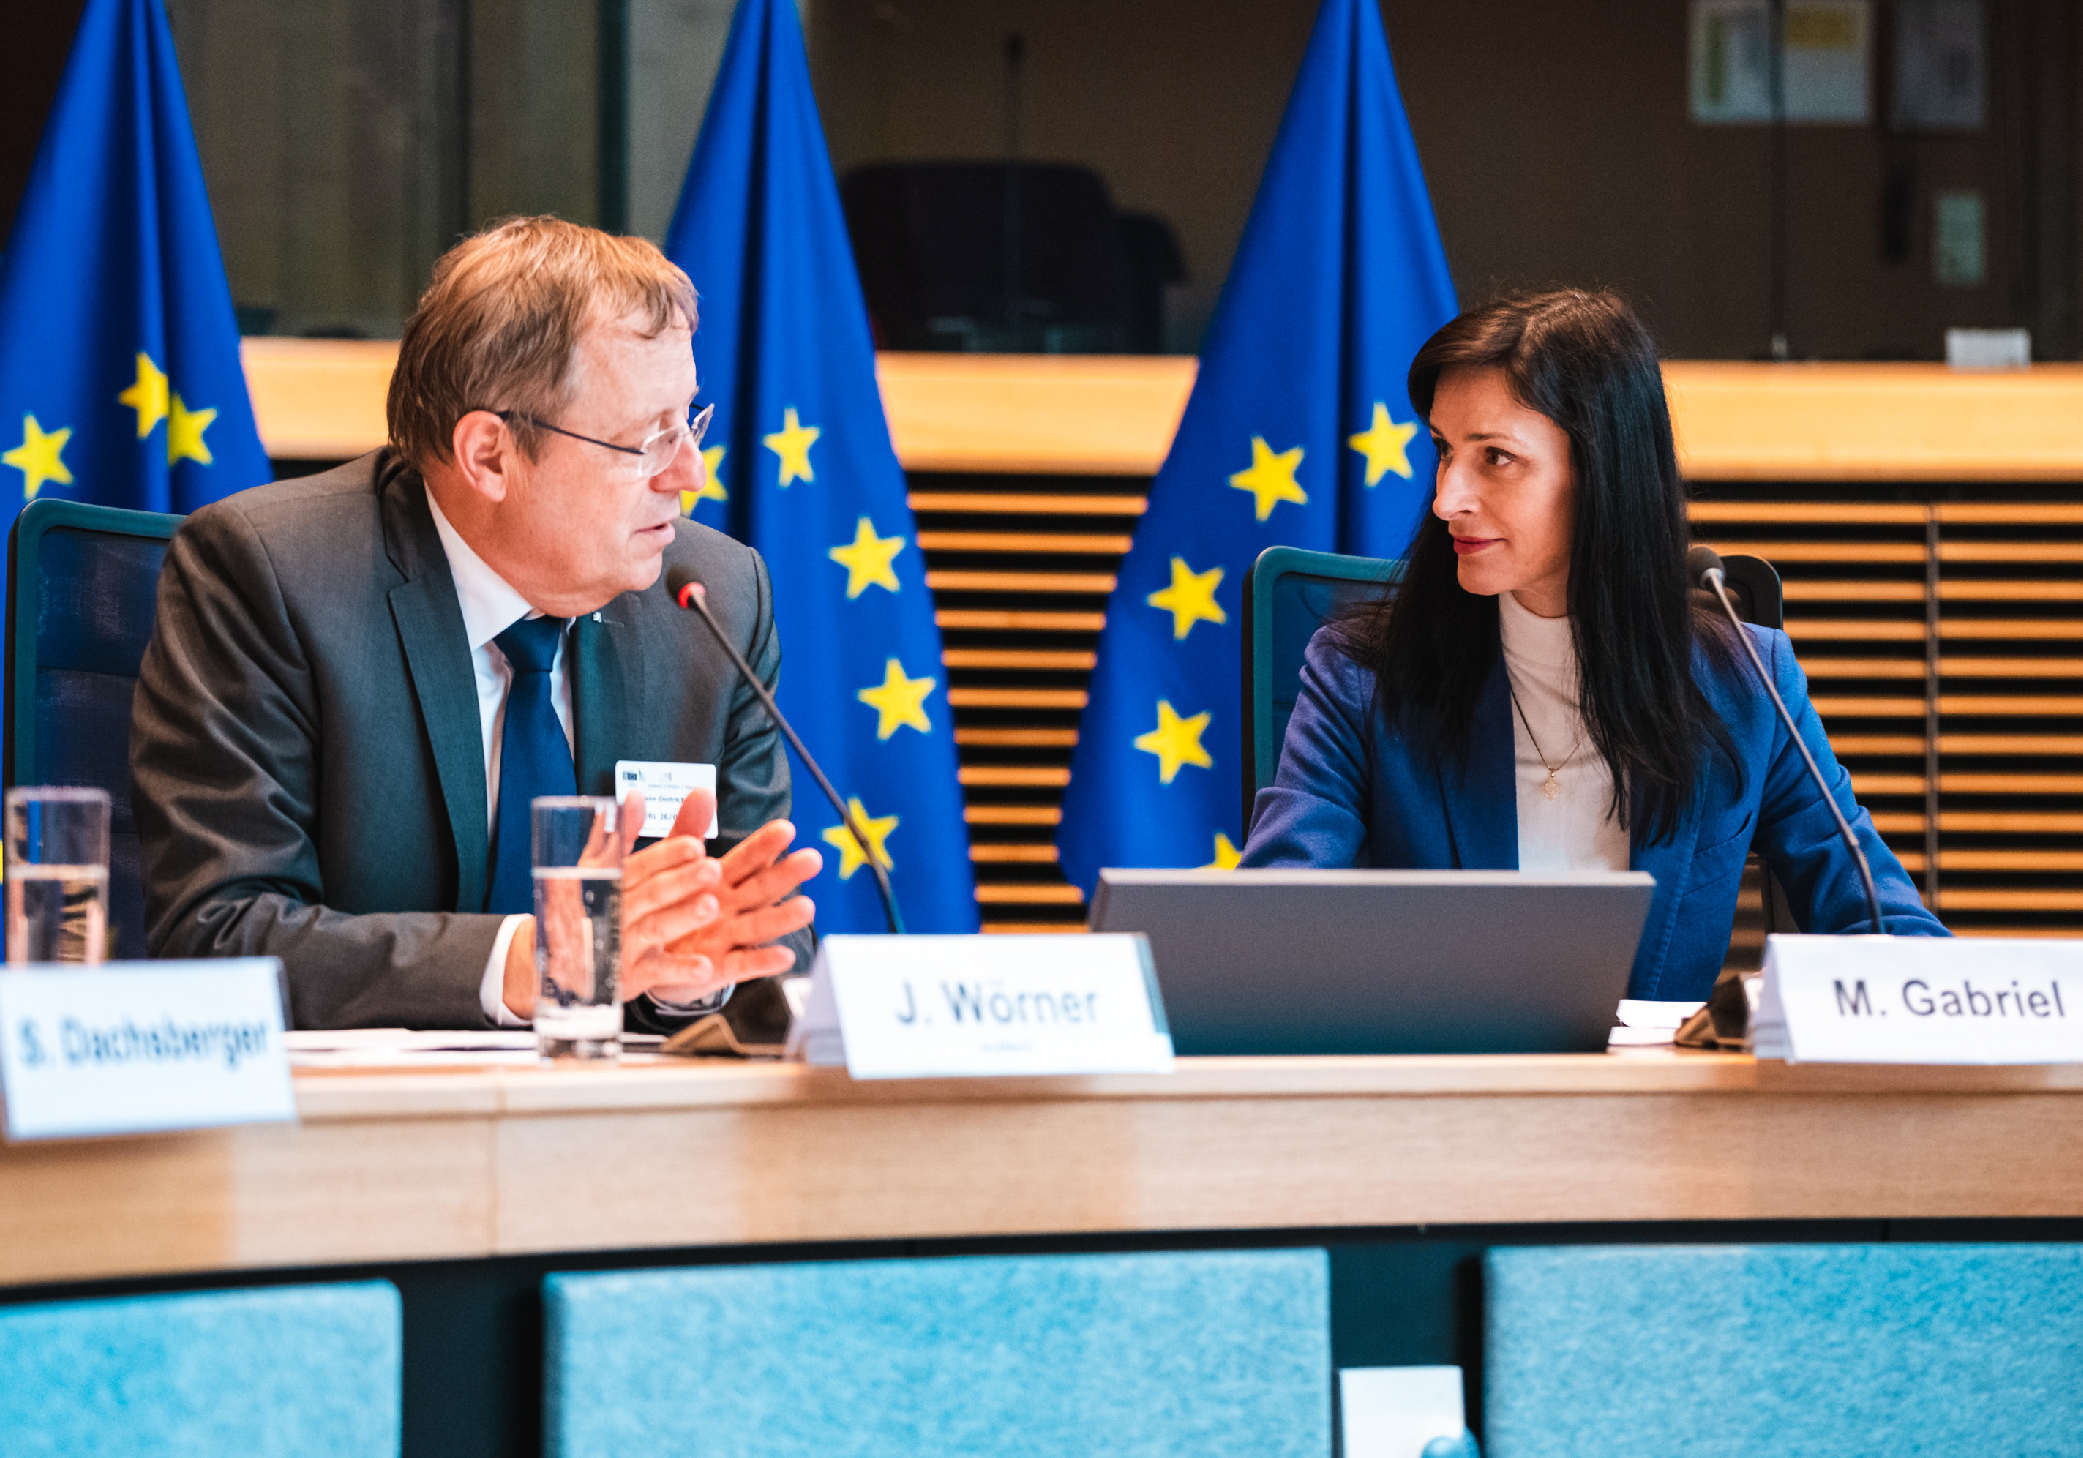 EU-Commissioner Mariya Gabriel meets with leaders from industry and academia for first Round Table of the “European Sounding Board on Innovation”.